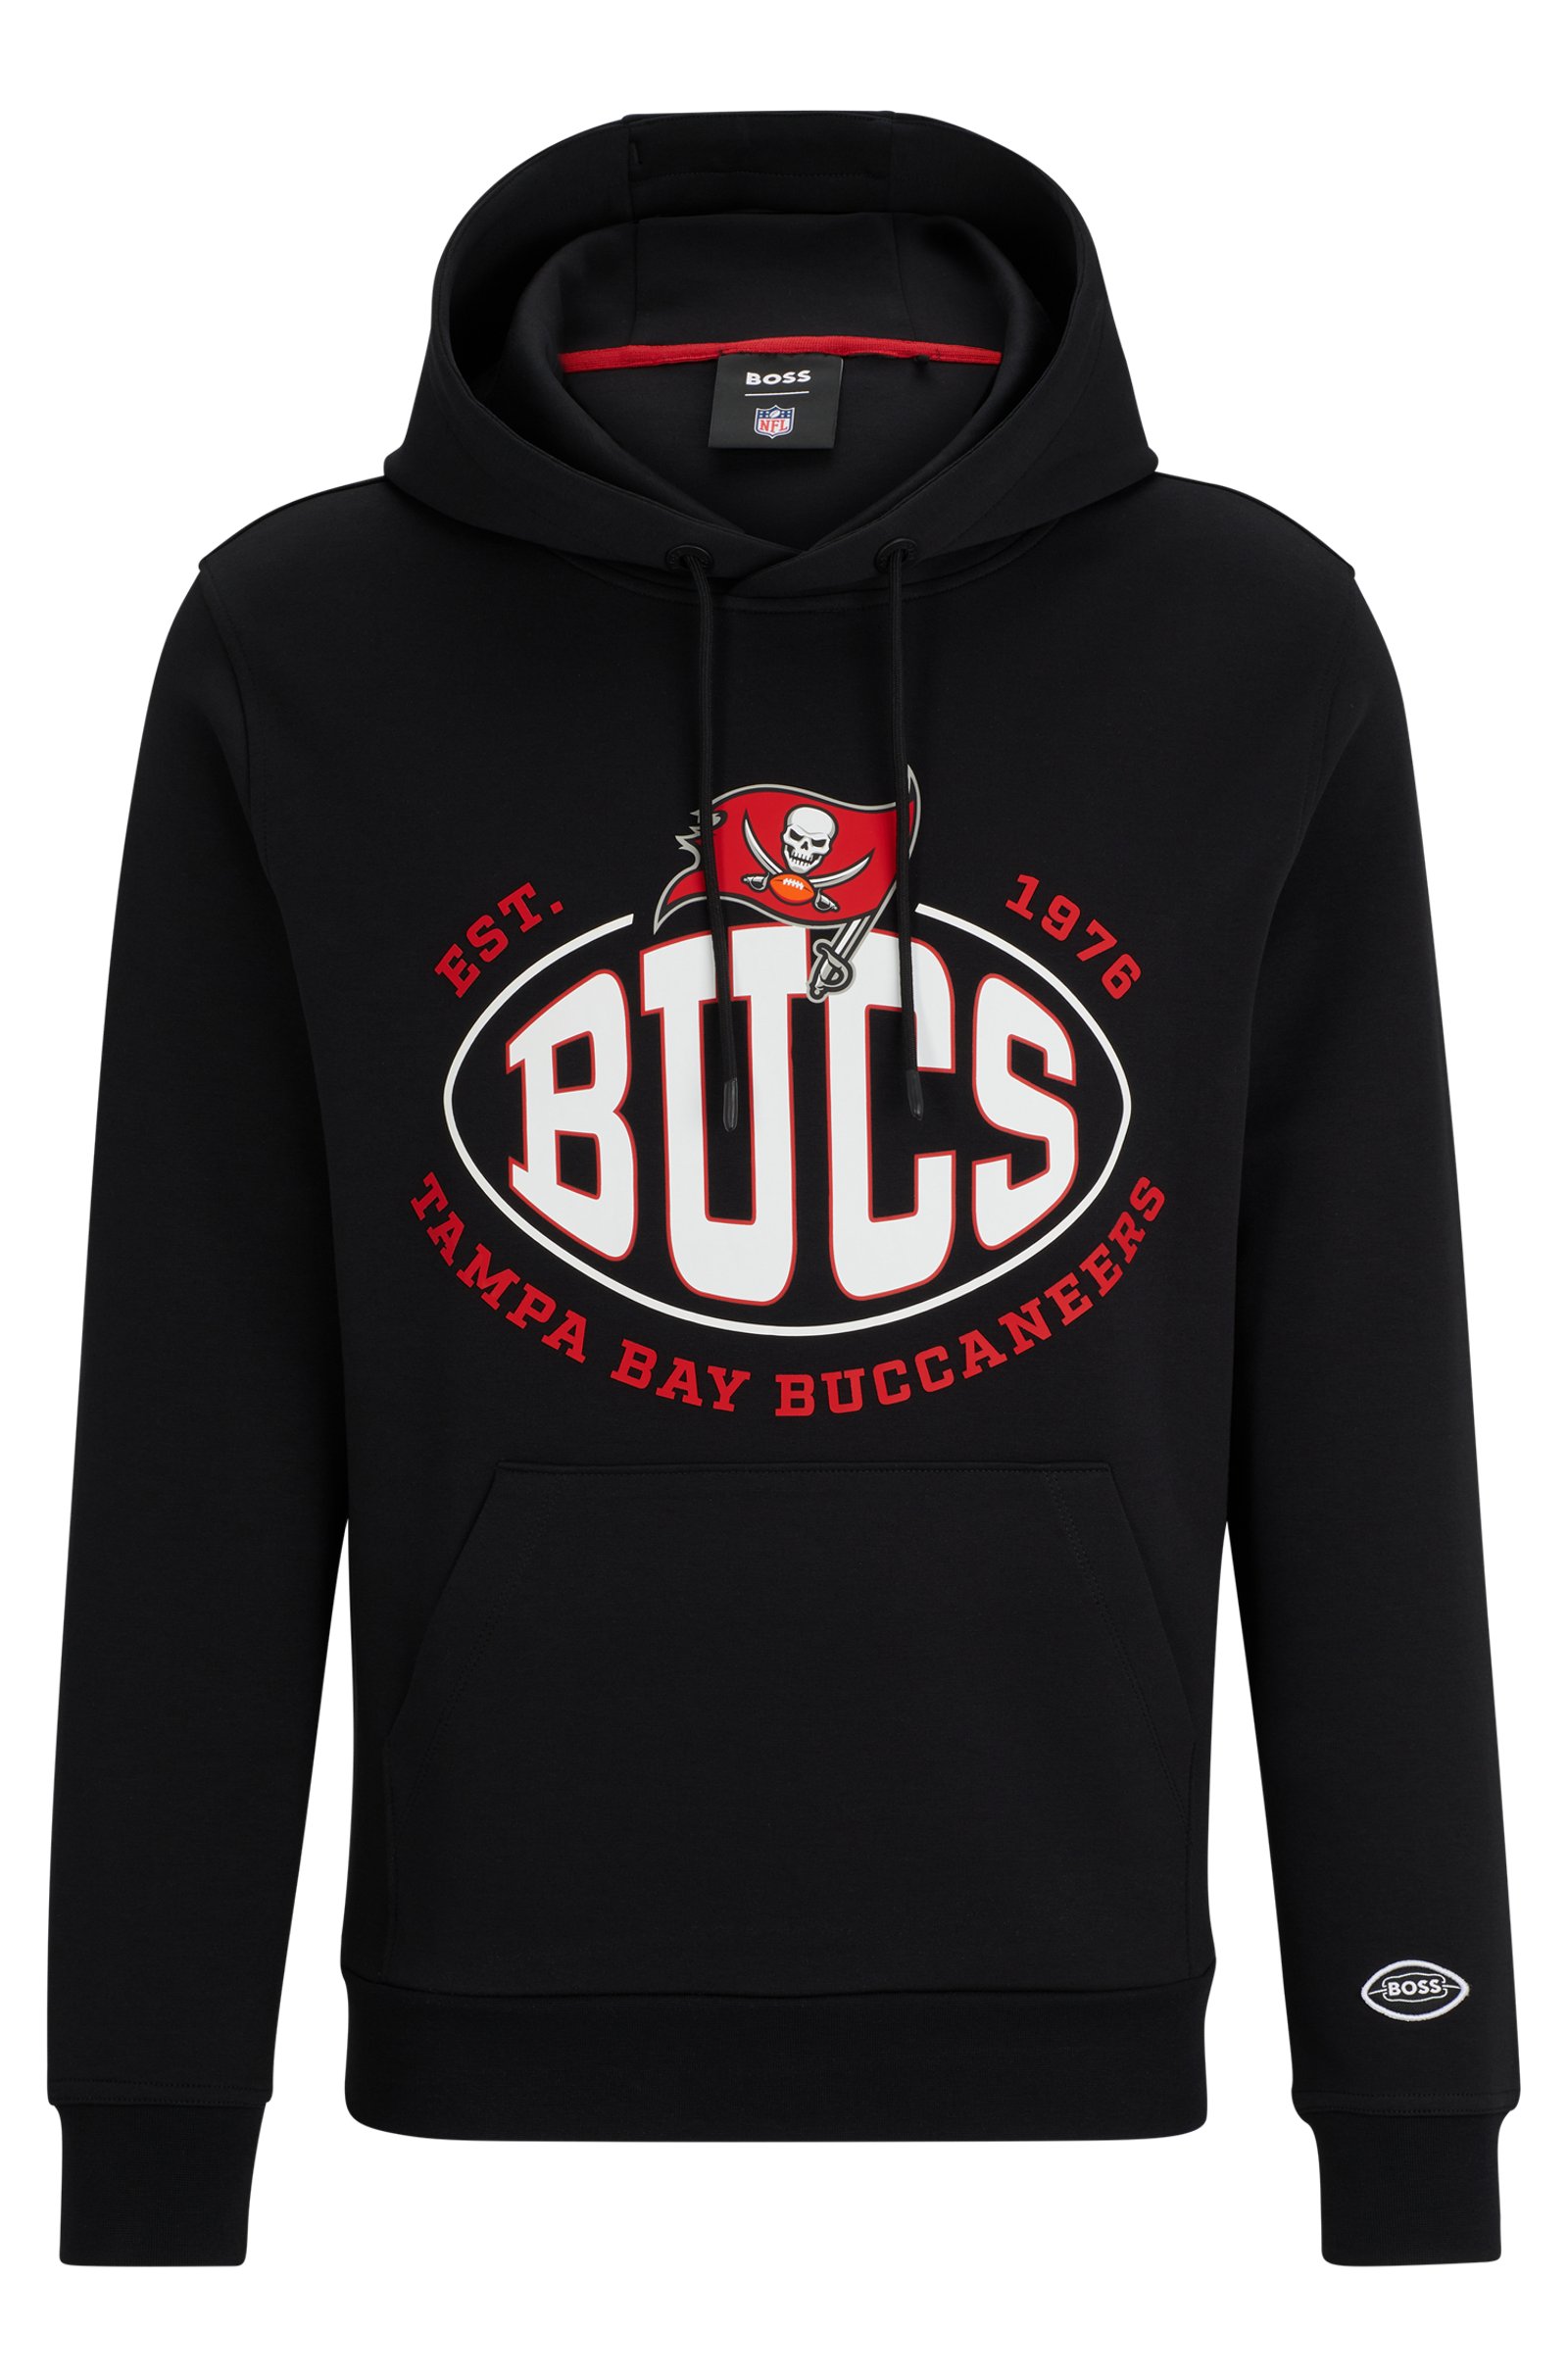 Толстовка Boss X Nfl Cotton-blend With Collaborative Branding, Bucs 2021 men s 3d hoodie black hoodie and red stitching with flame c letter cool outdoor flame print hoodie